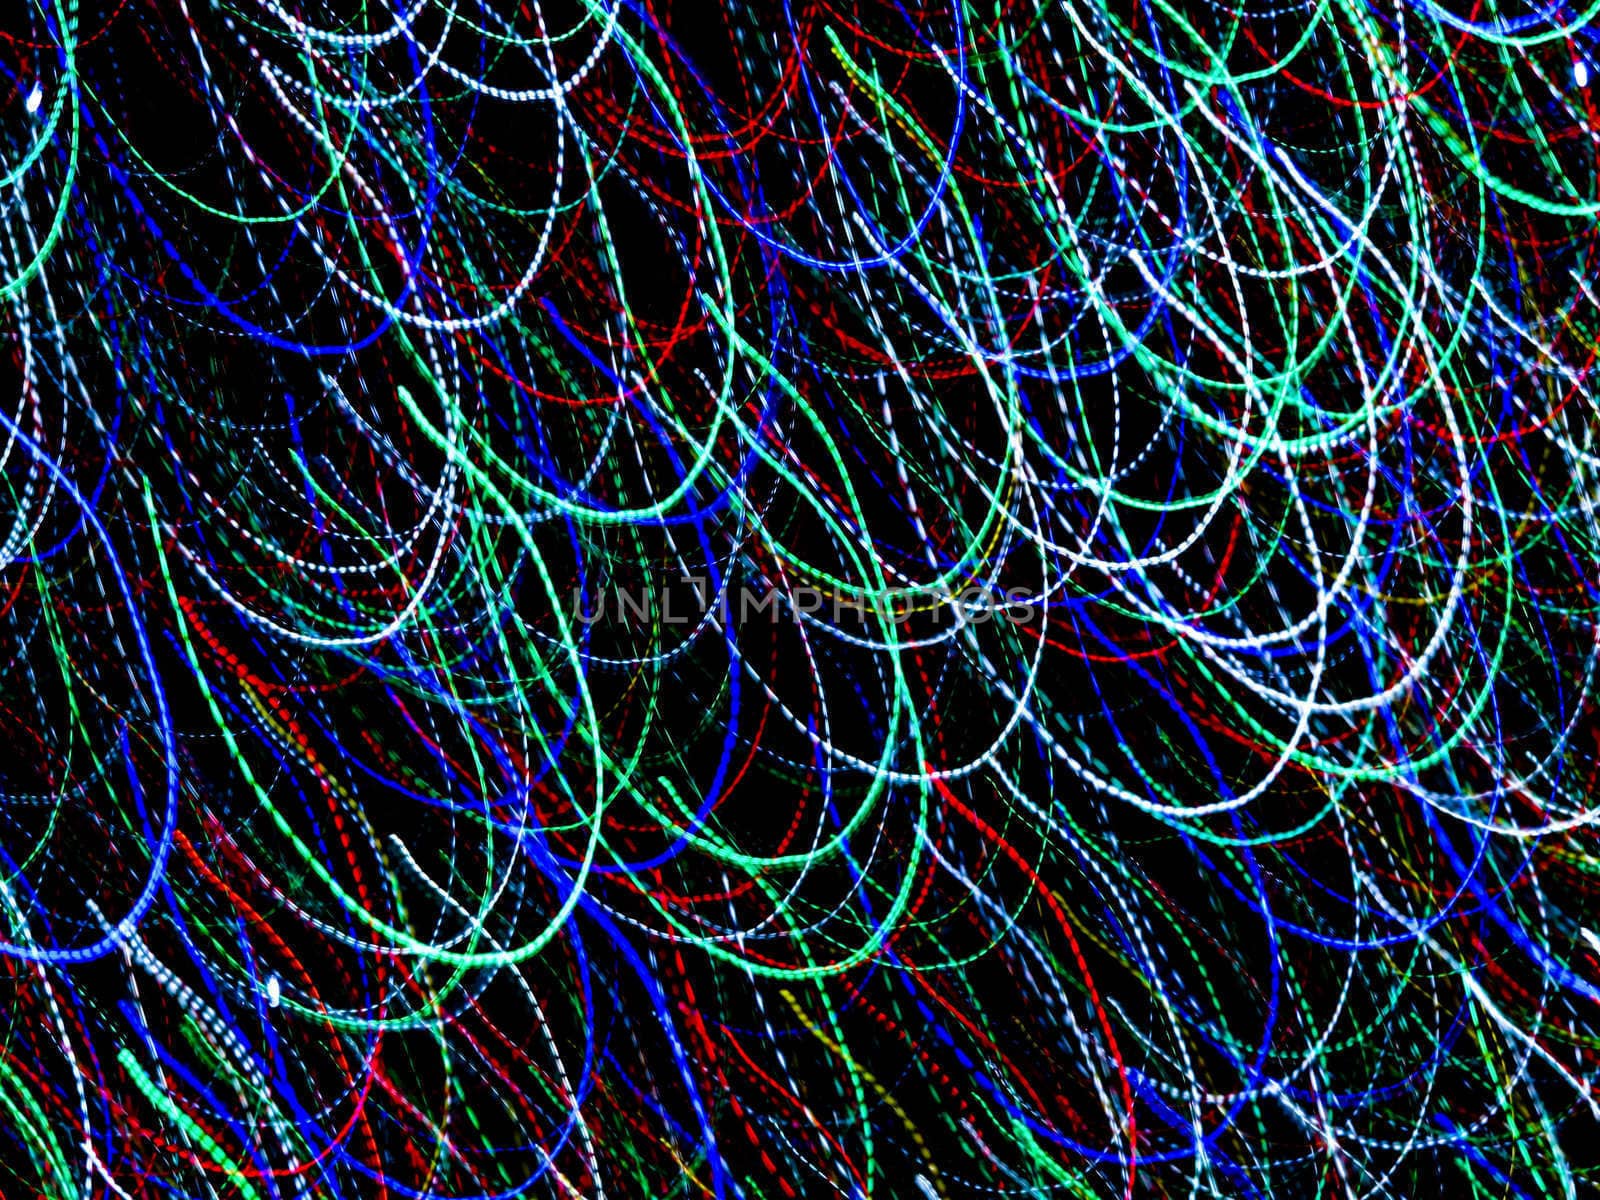 Absract colorful lights by ADavis